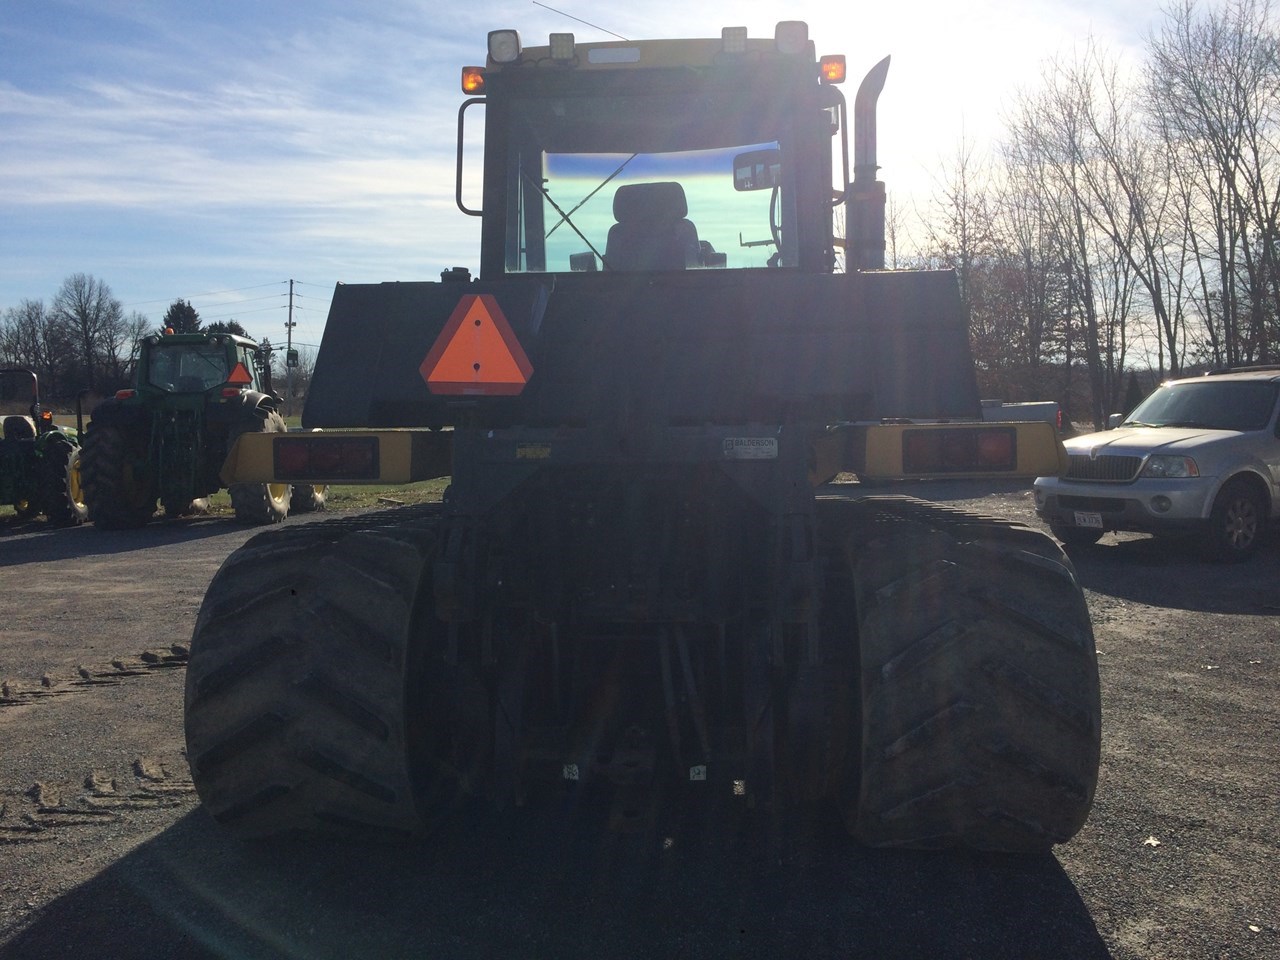 1994 Caterpillar 65C Tractor - Track For Sale